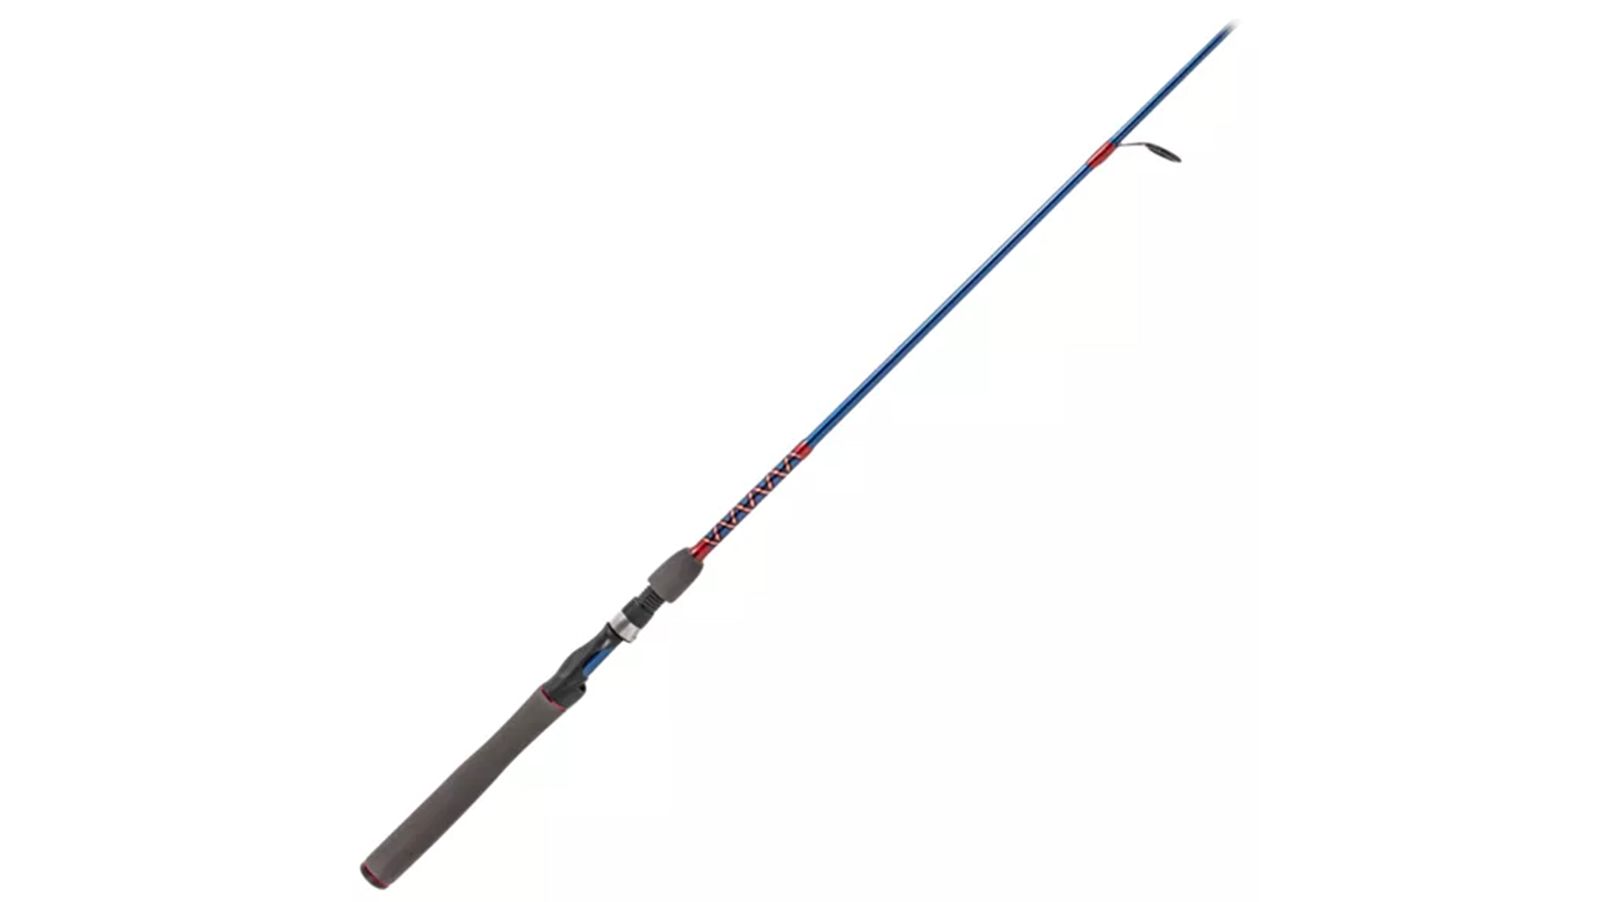 Telescopic Fishing Pole Useful Spinning Fishing Rod Black for Bass Trout  Fishing